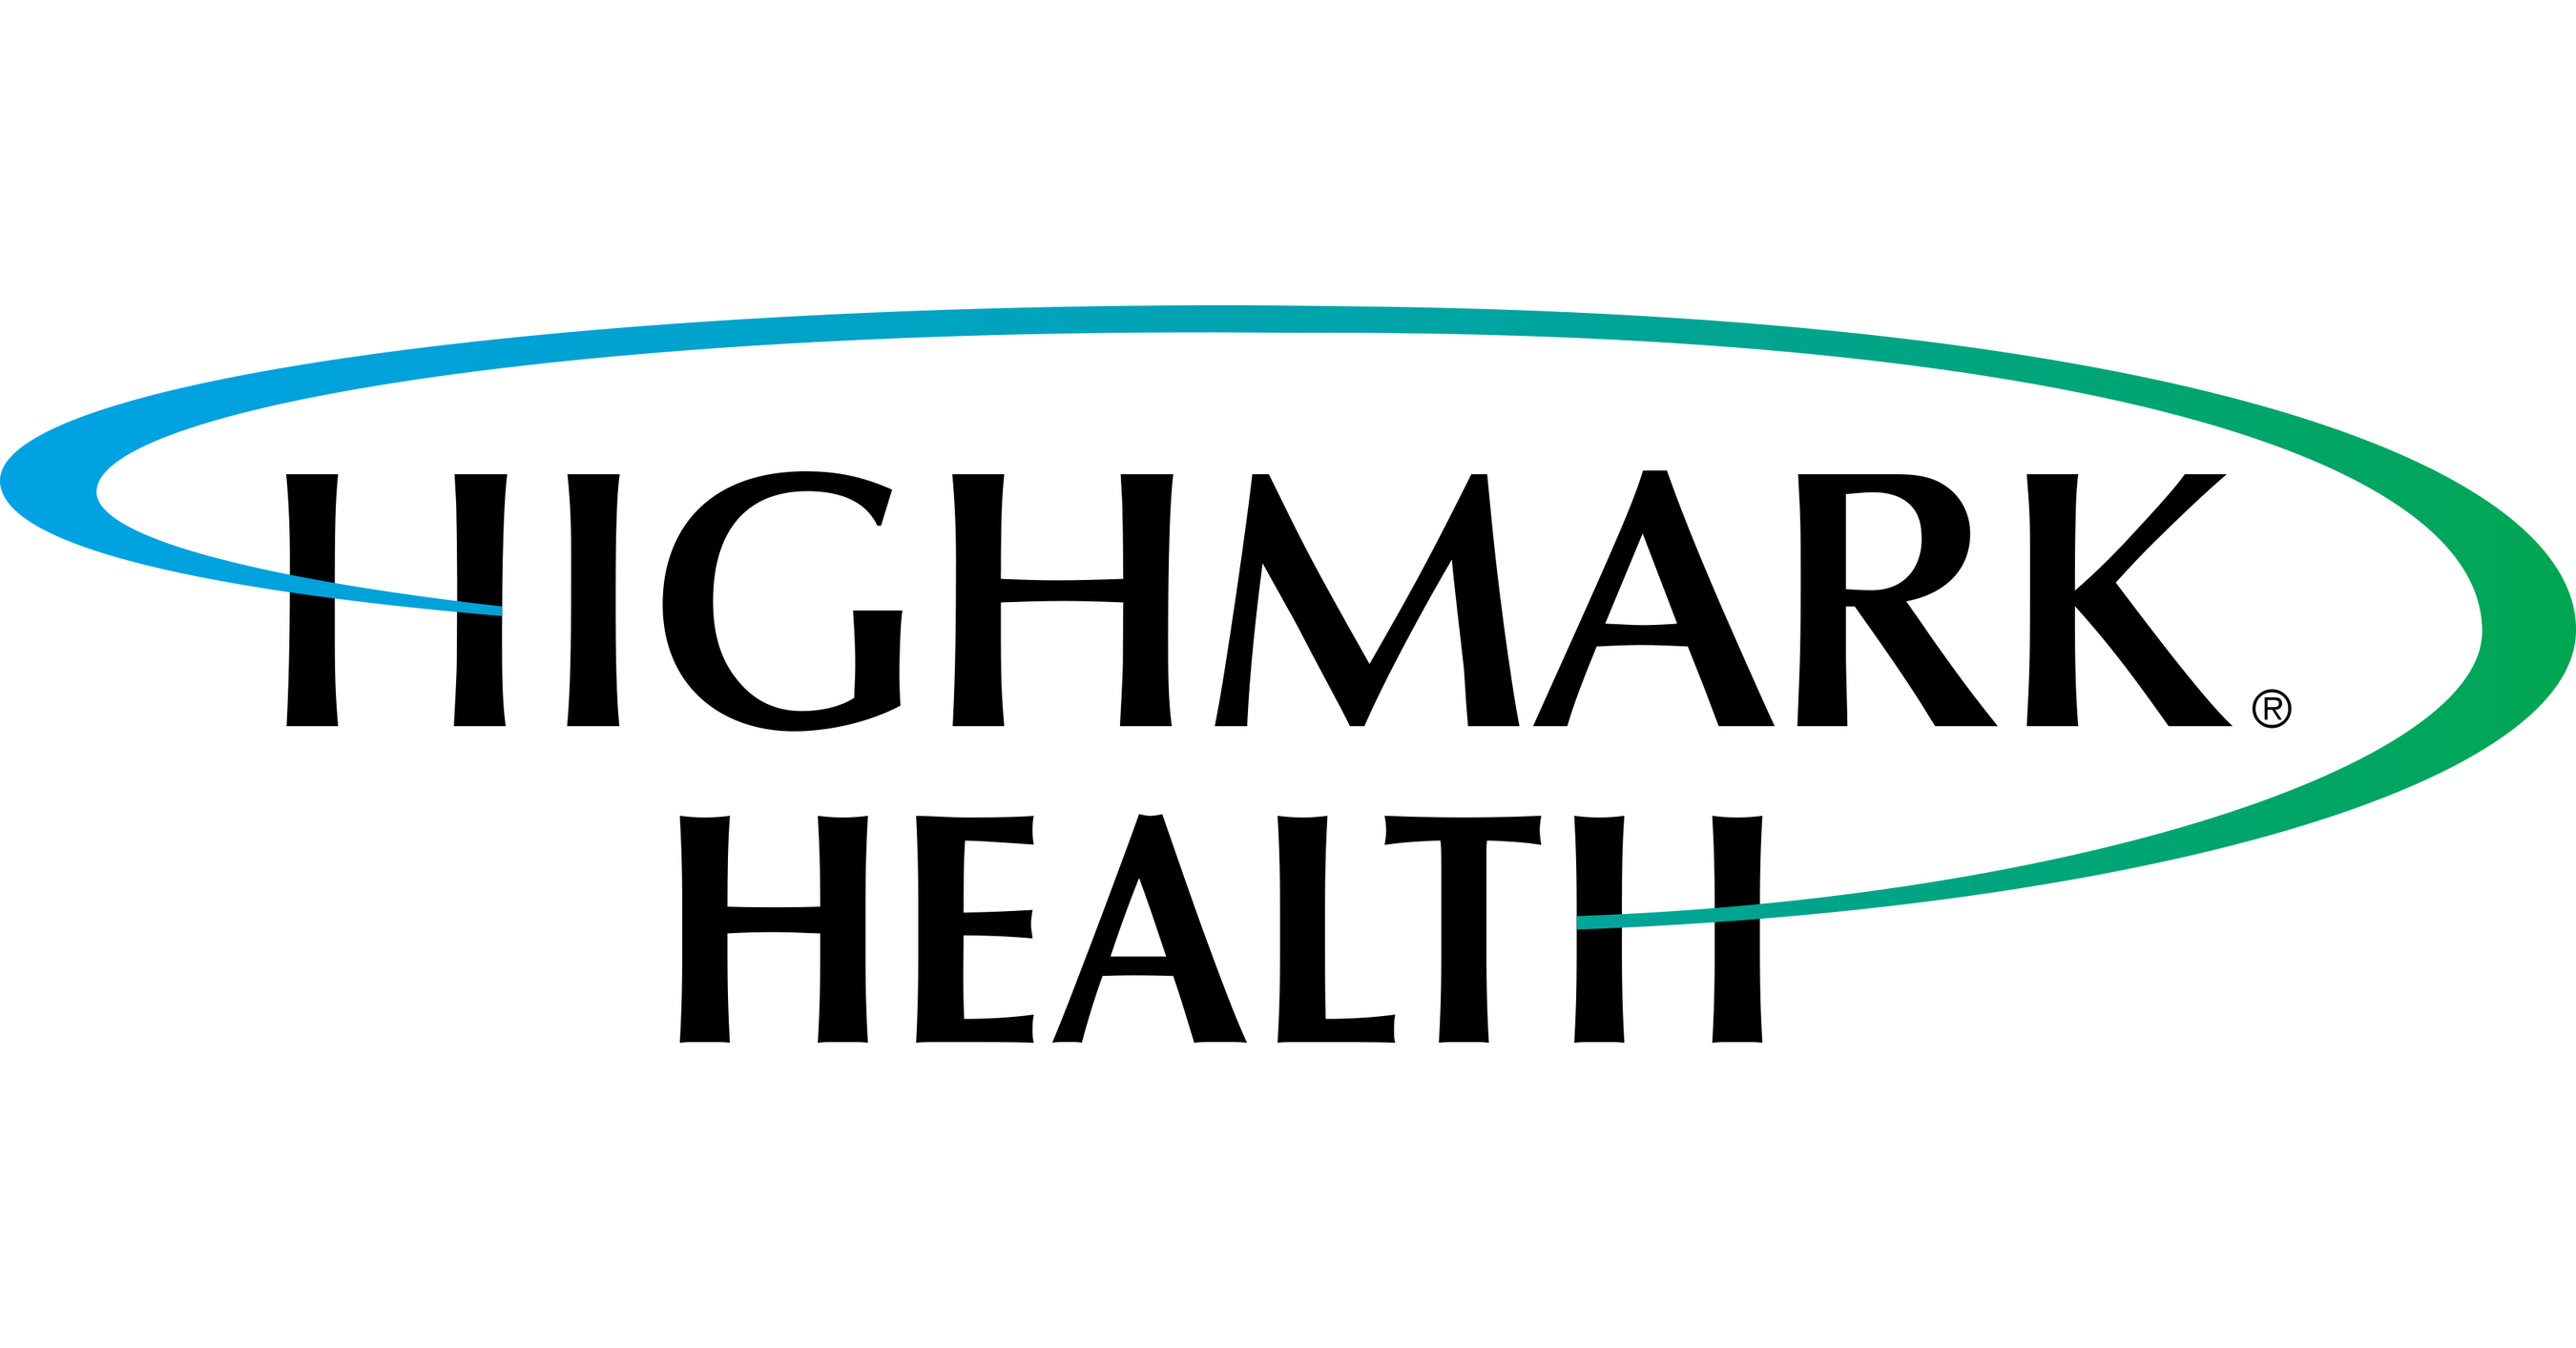 Highmark health stock value the centers for medicare and medicaid services agency is located in the